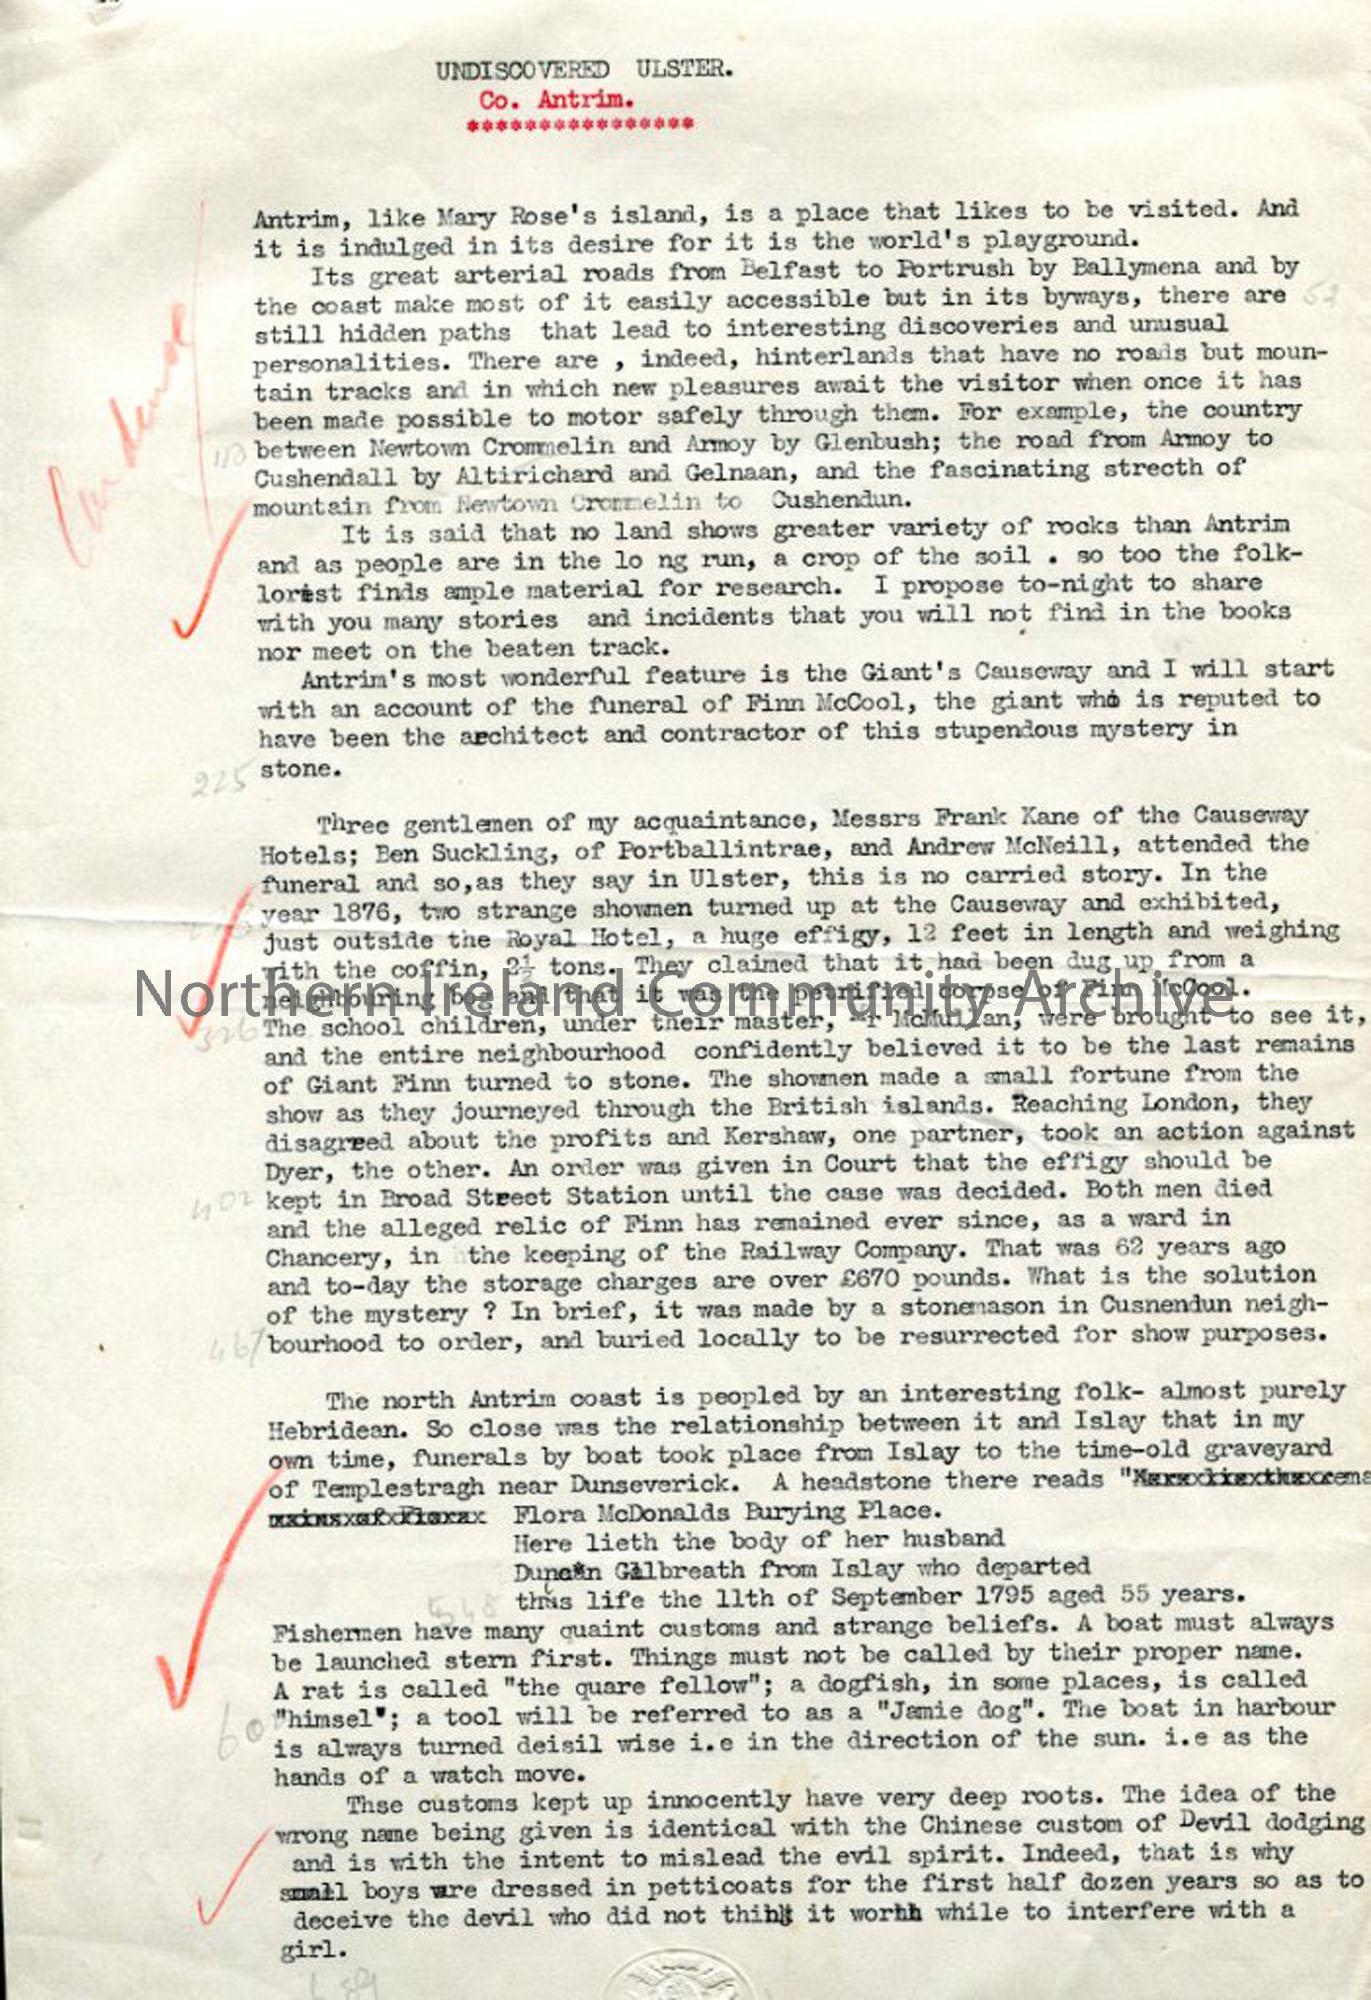 Page 1 of 13 – Script – ‘Undiscovered Ulster – Co. Antrim’